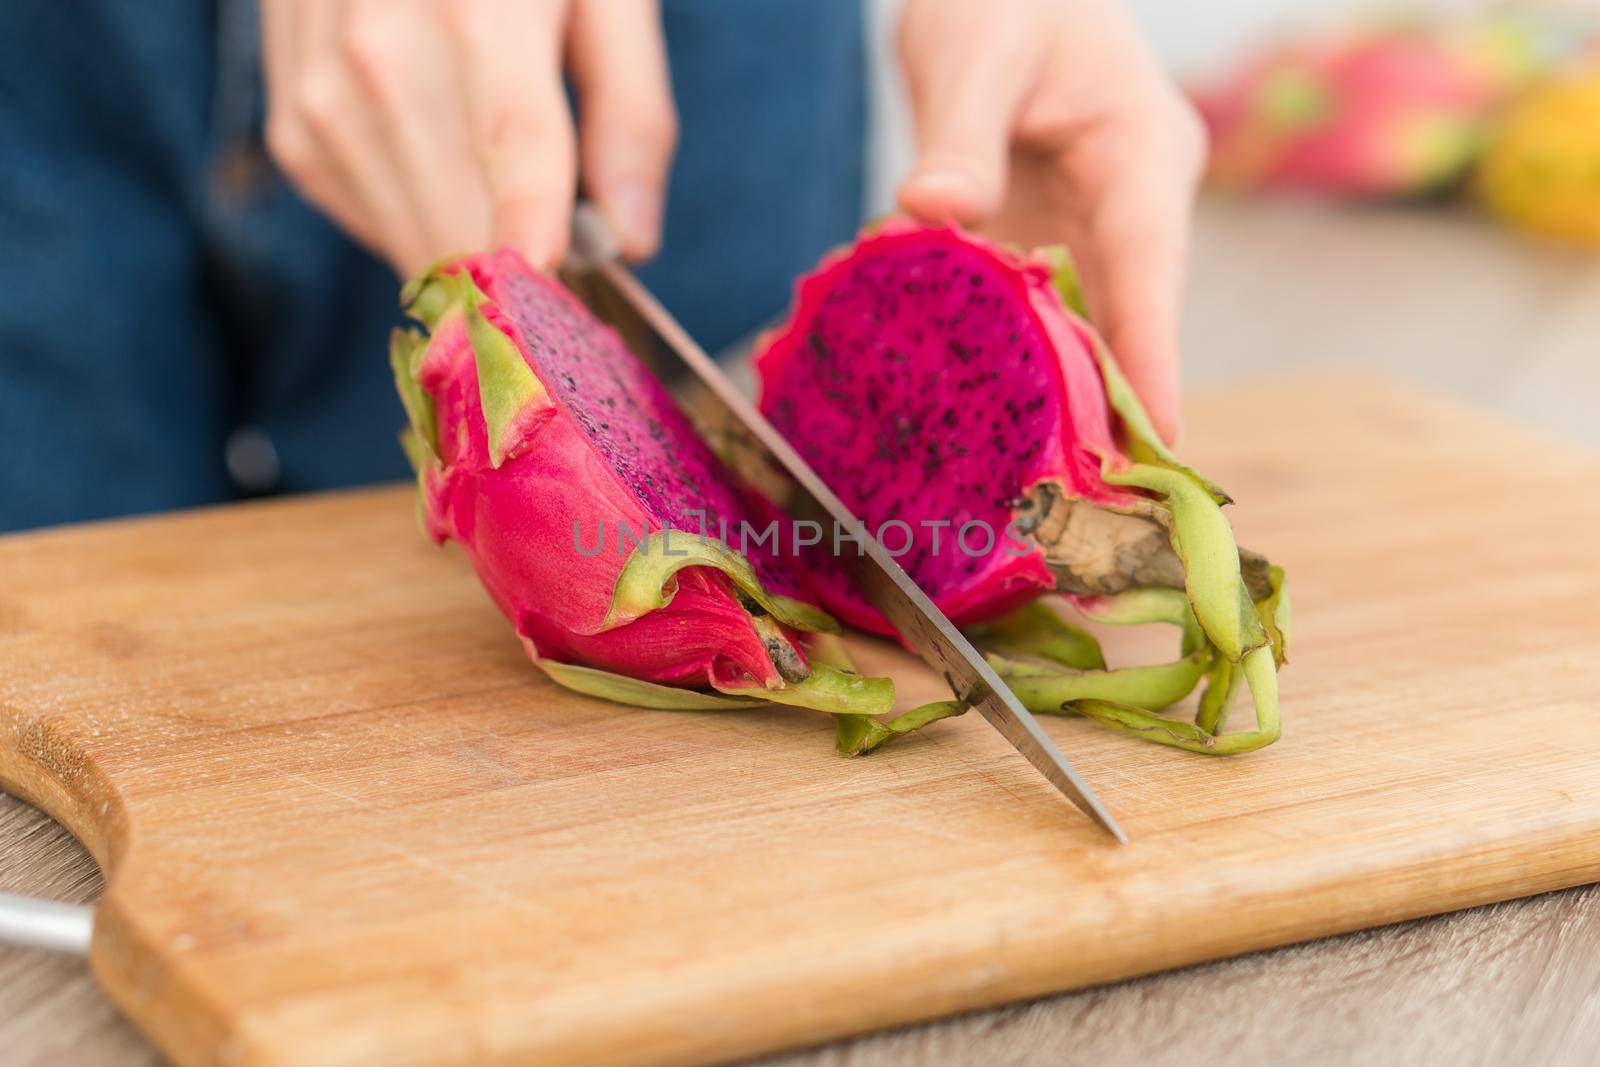 Female hands is cutting a dragon fruit or pitaya with pink skin and pulp with black seeds on wooden cut board on the table. Exotic fruits, healthy eating concept by balinska_lv